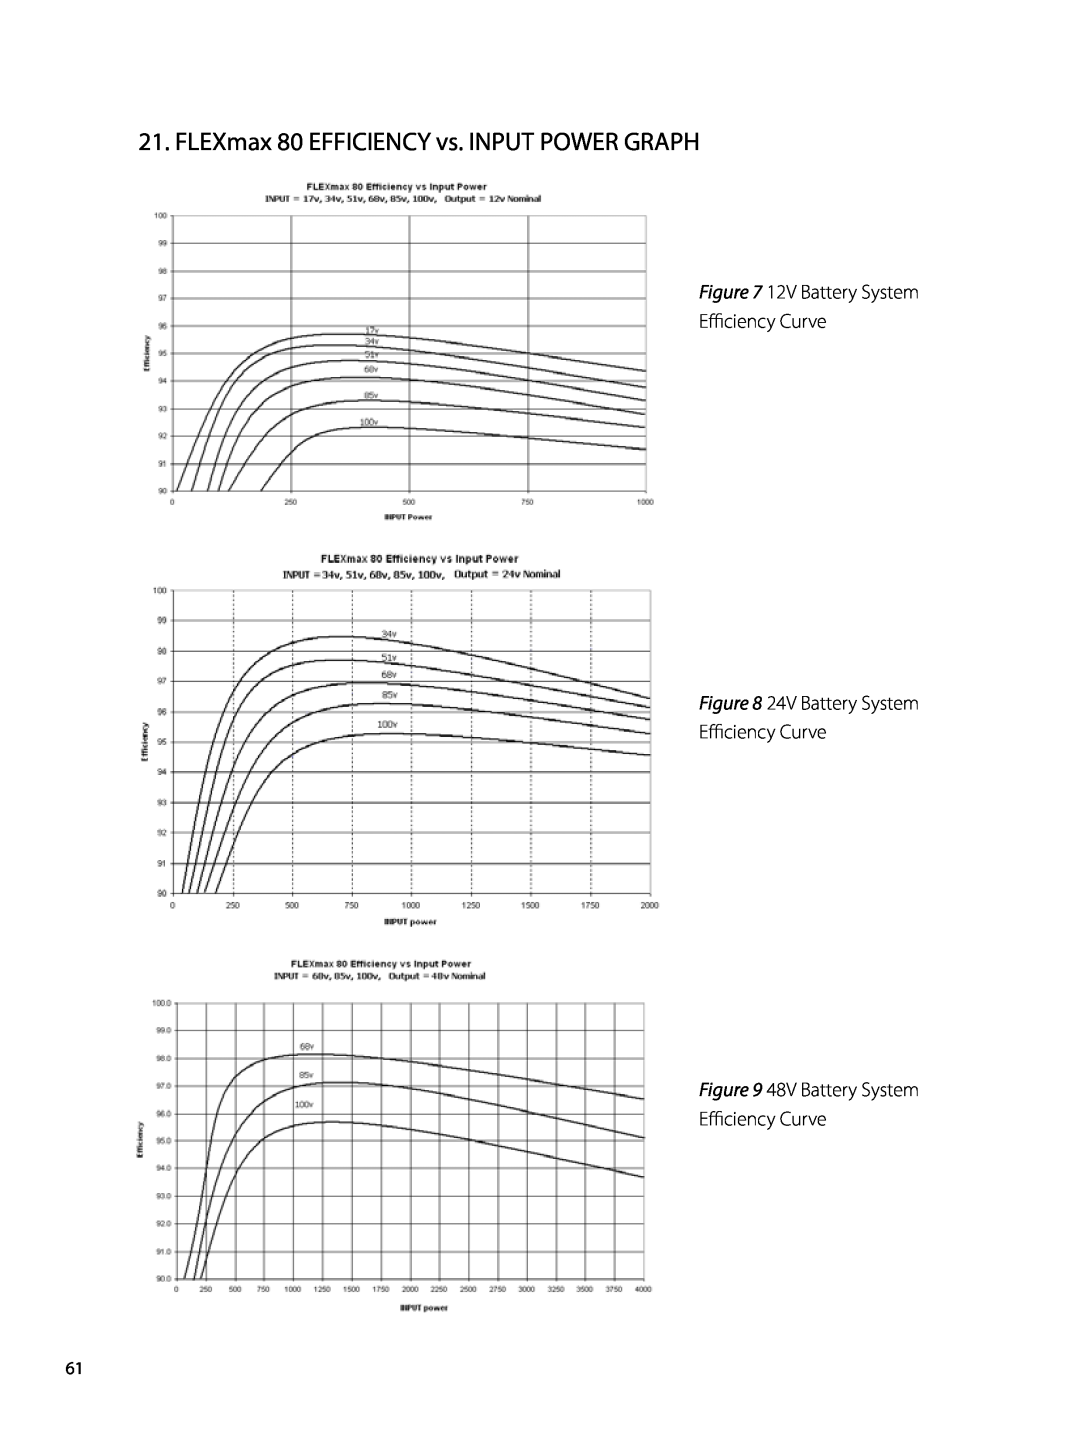 Outback Power Systems user manual FLEXmax 80 EFFICIENCY vs. INPUT POWER GRAPH, 12V Battery System Efficiency Curve 